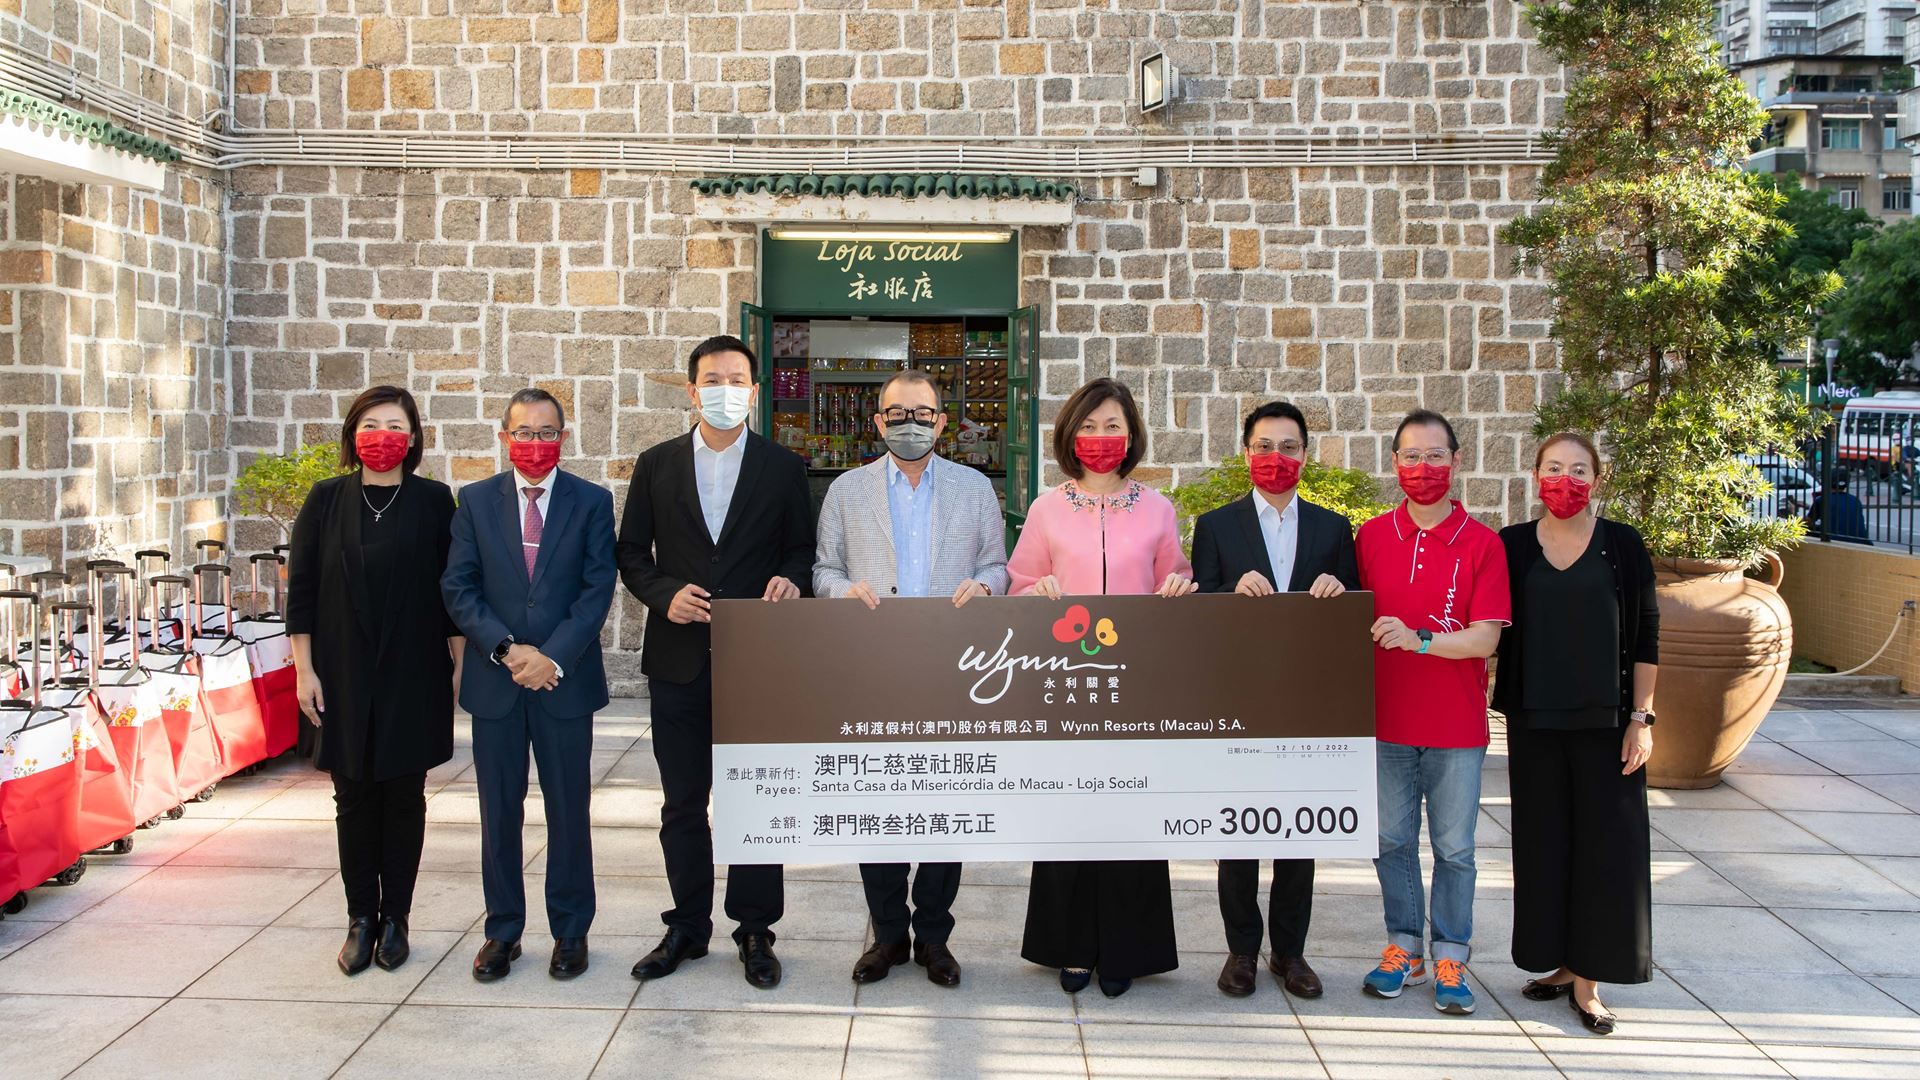 Wynn donates MOP $300,000 to support the Welfare Shop Project of SCMM